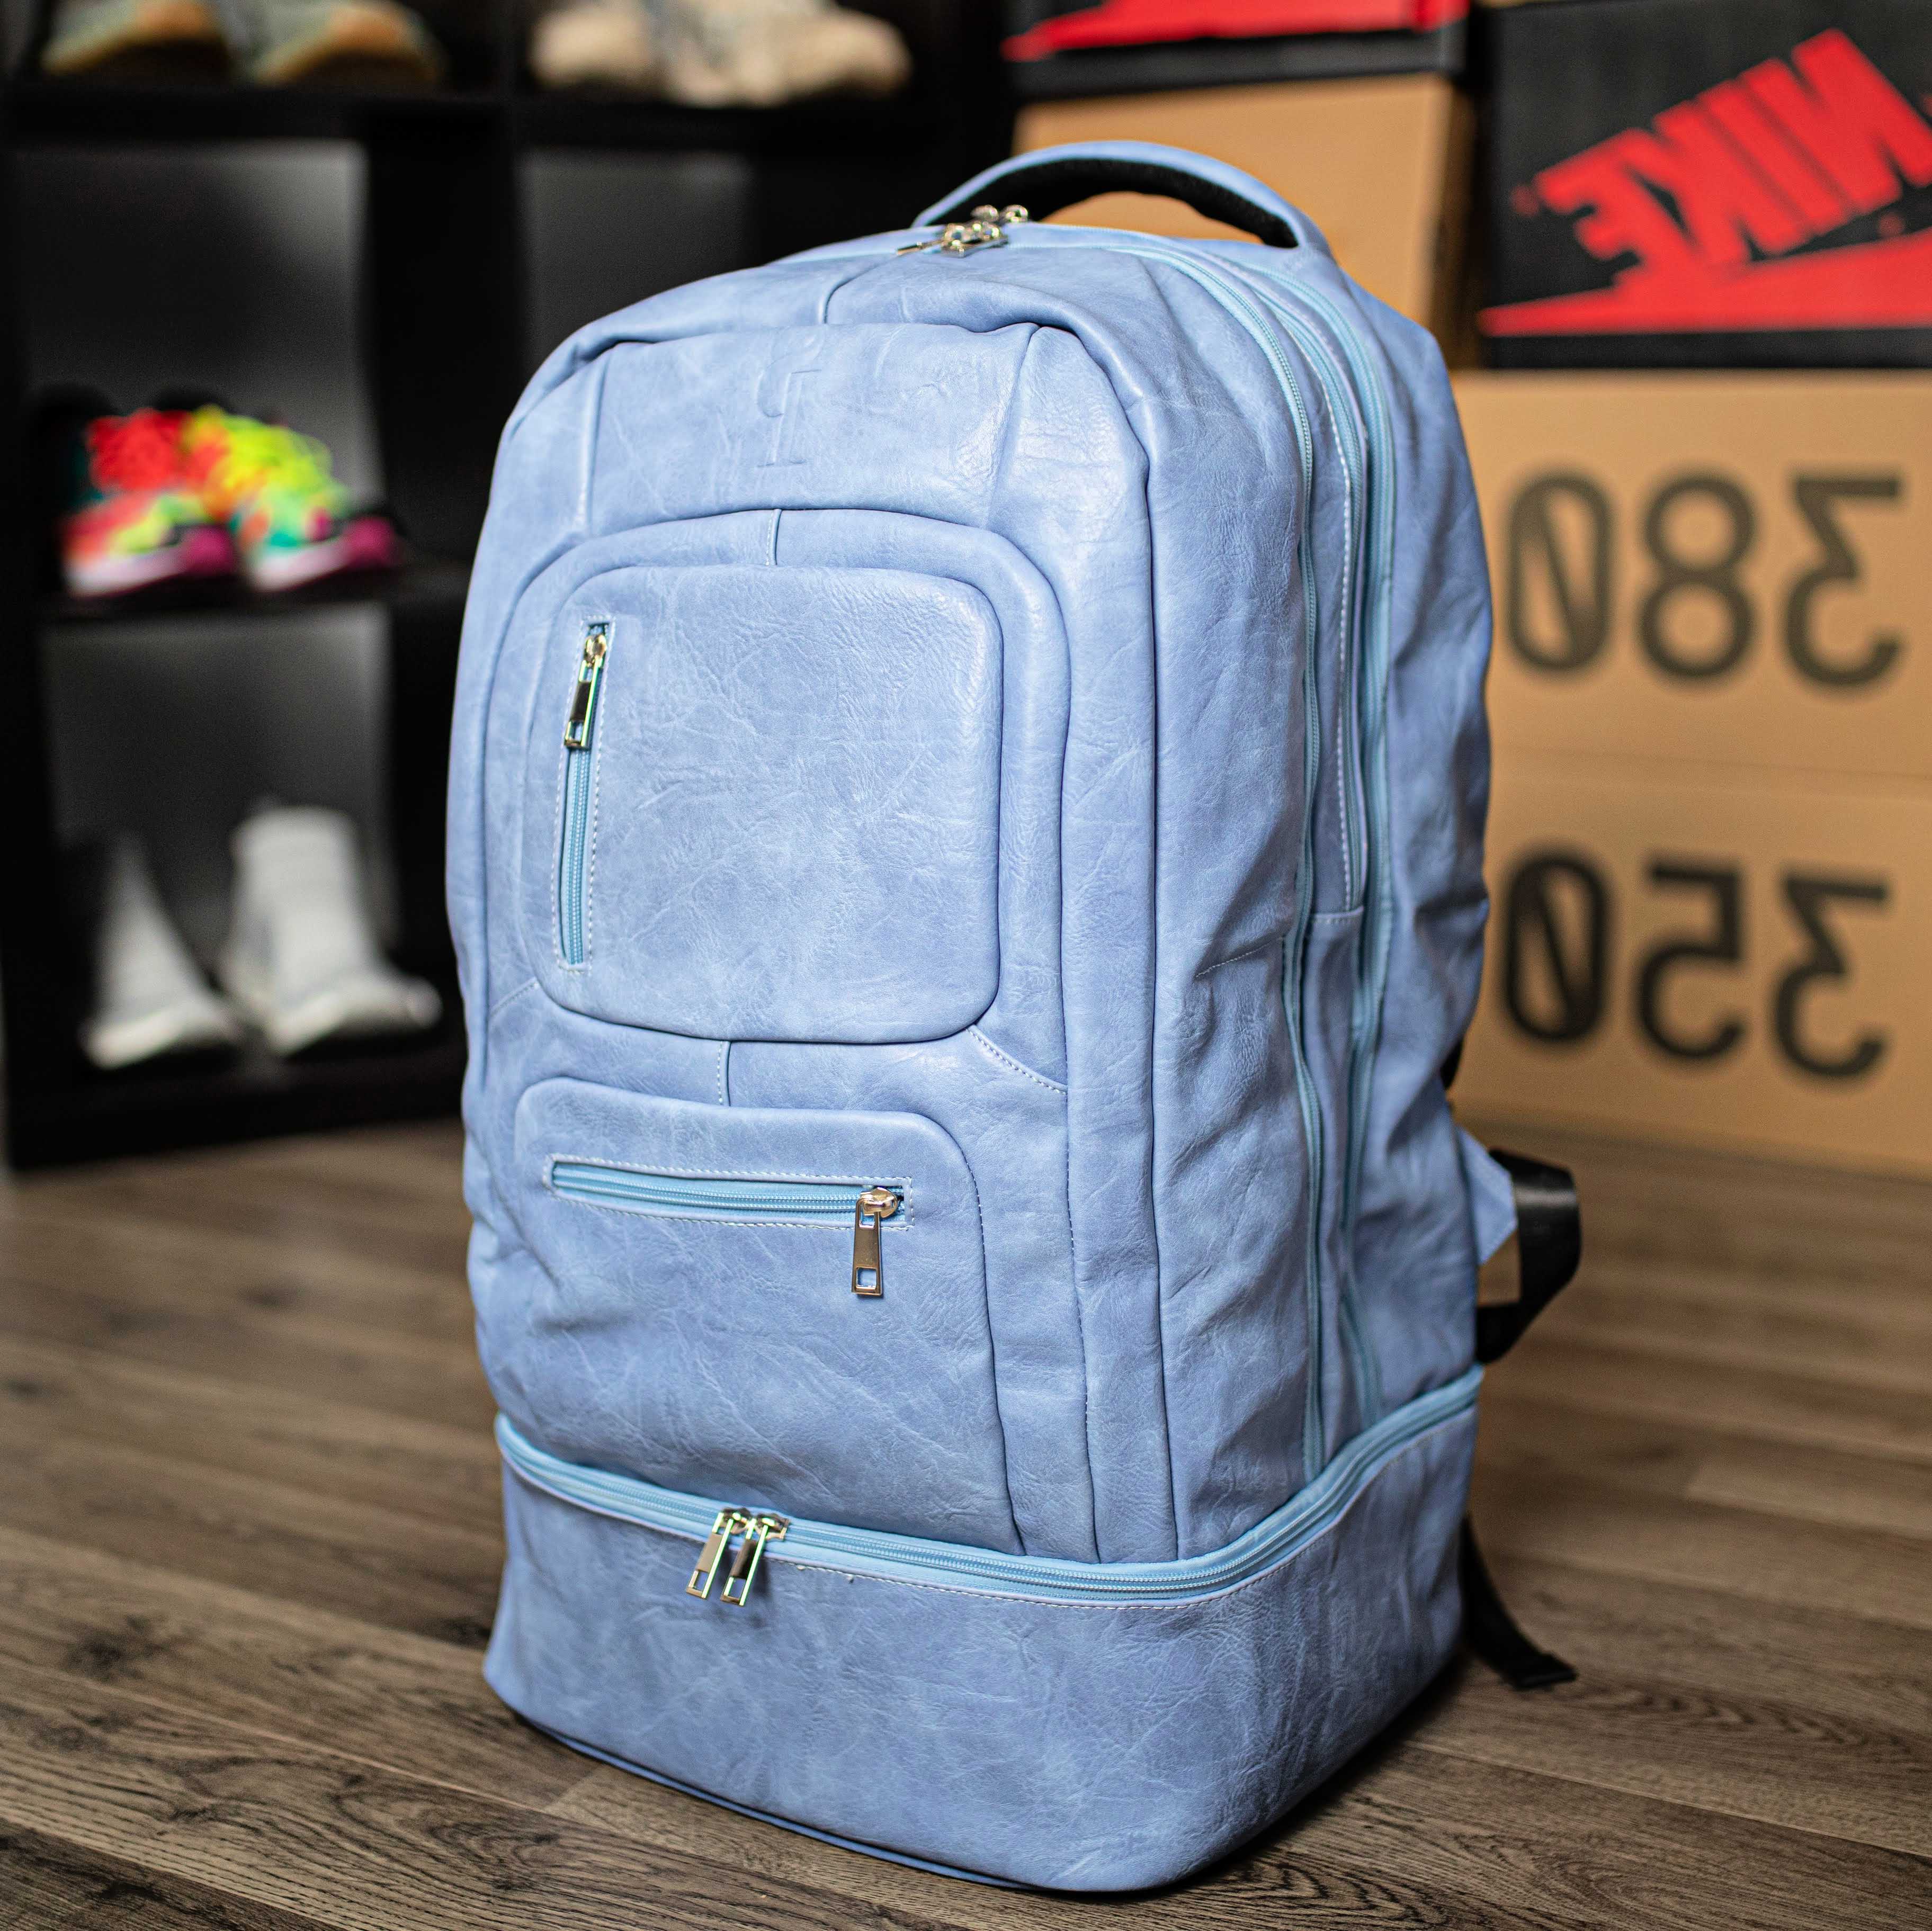 Baby Blue Luciano Leather Duffle Bag